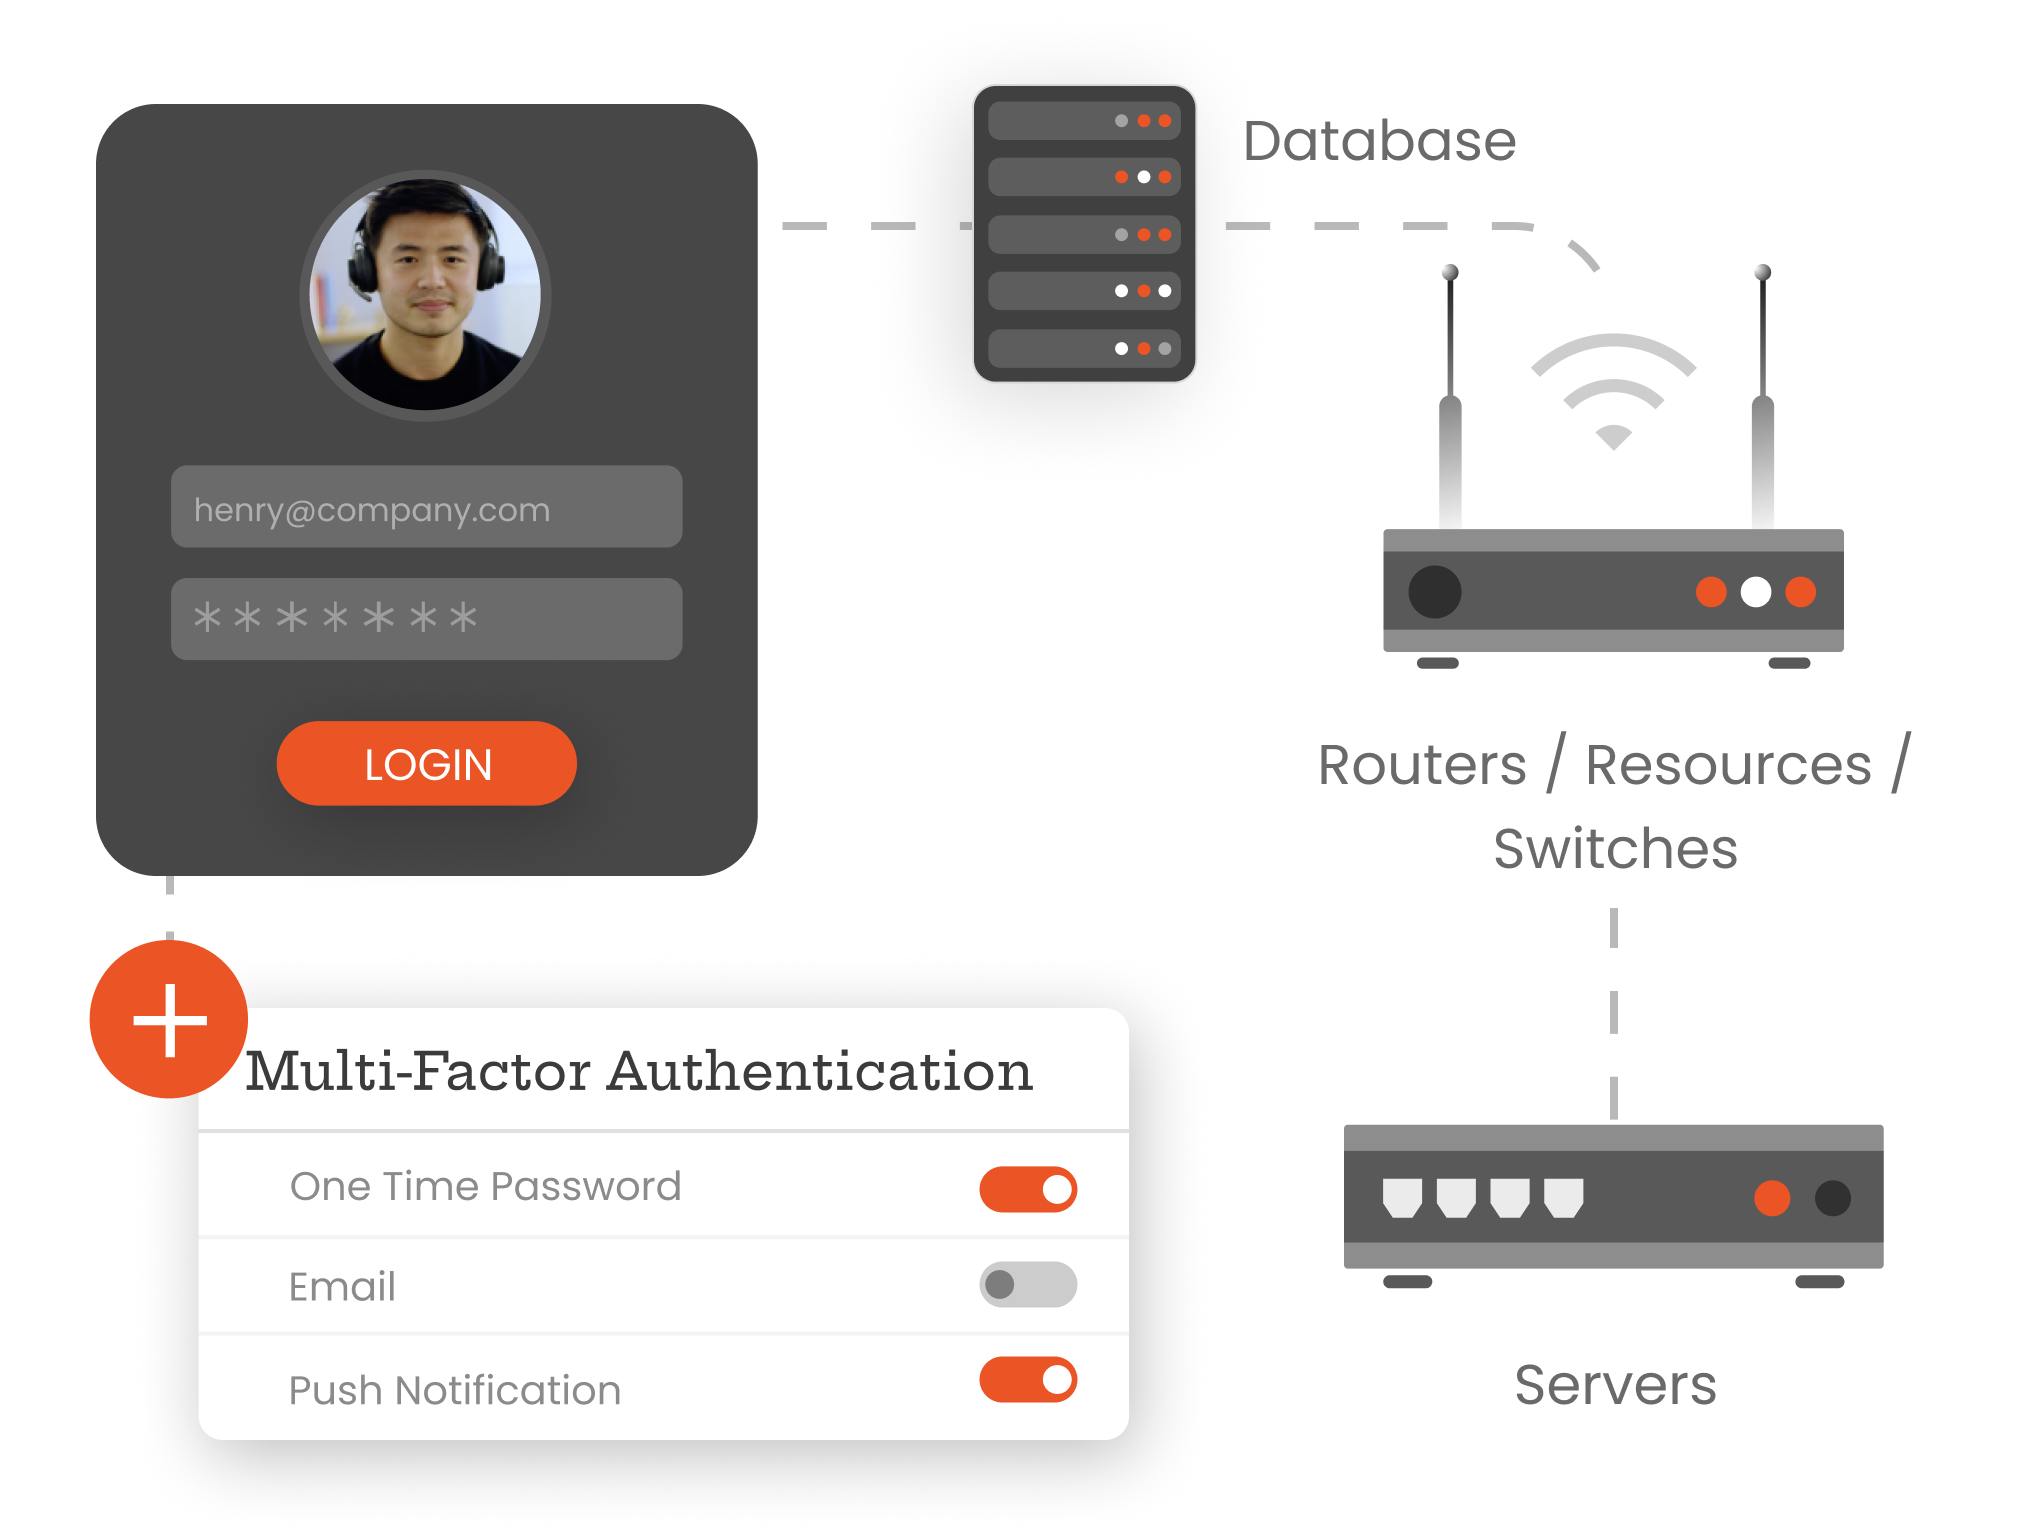 Multi-Factor Authentication flow for authenticator applications